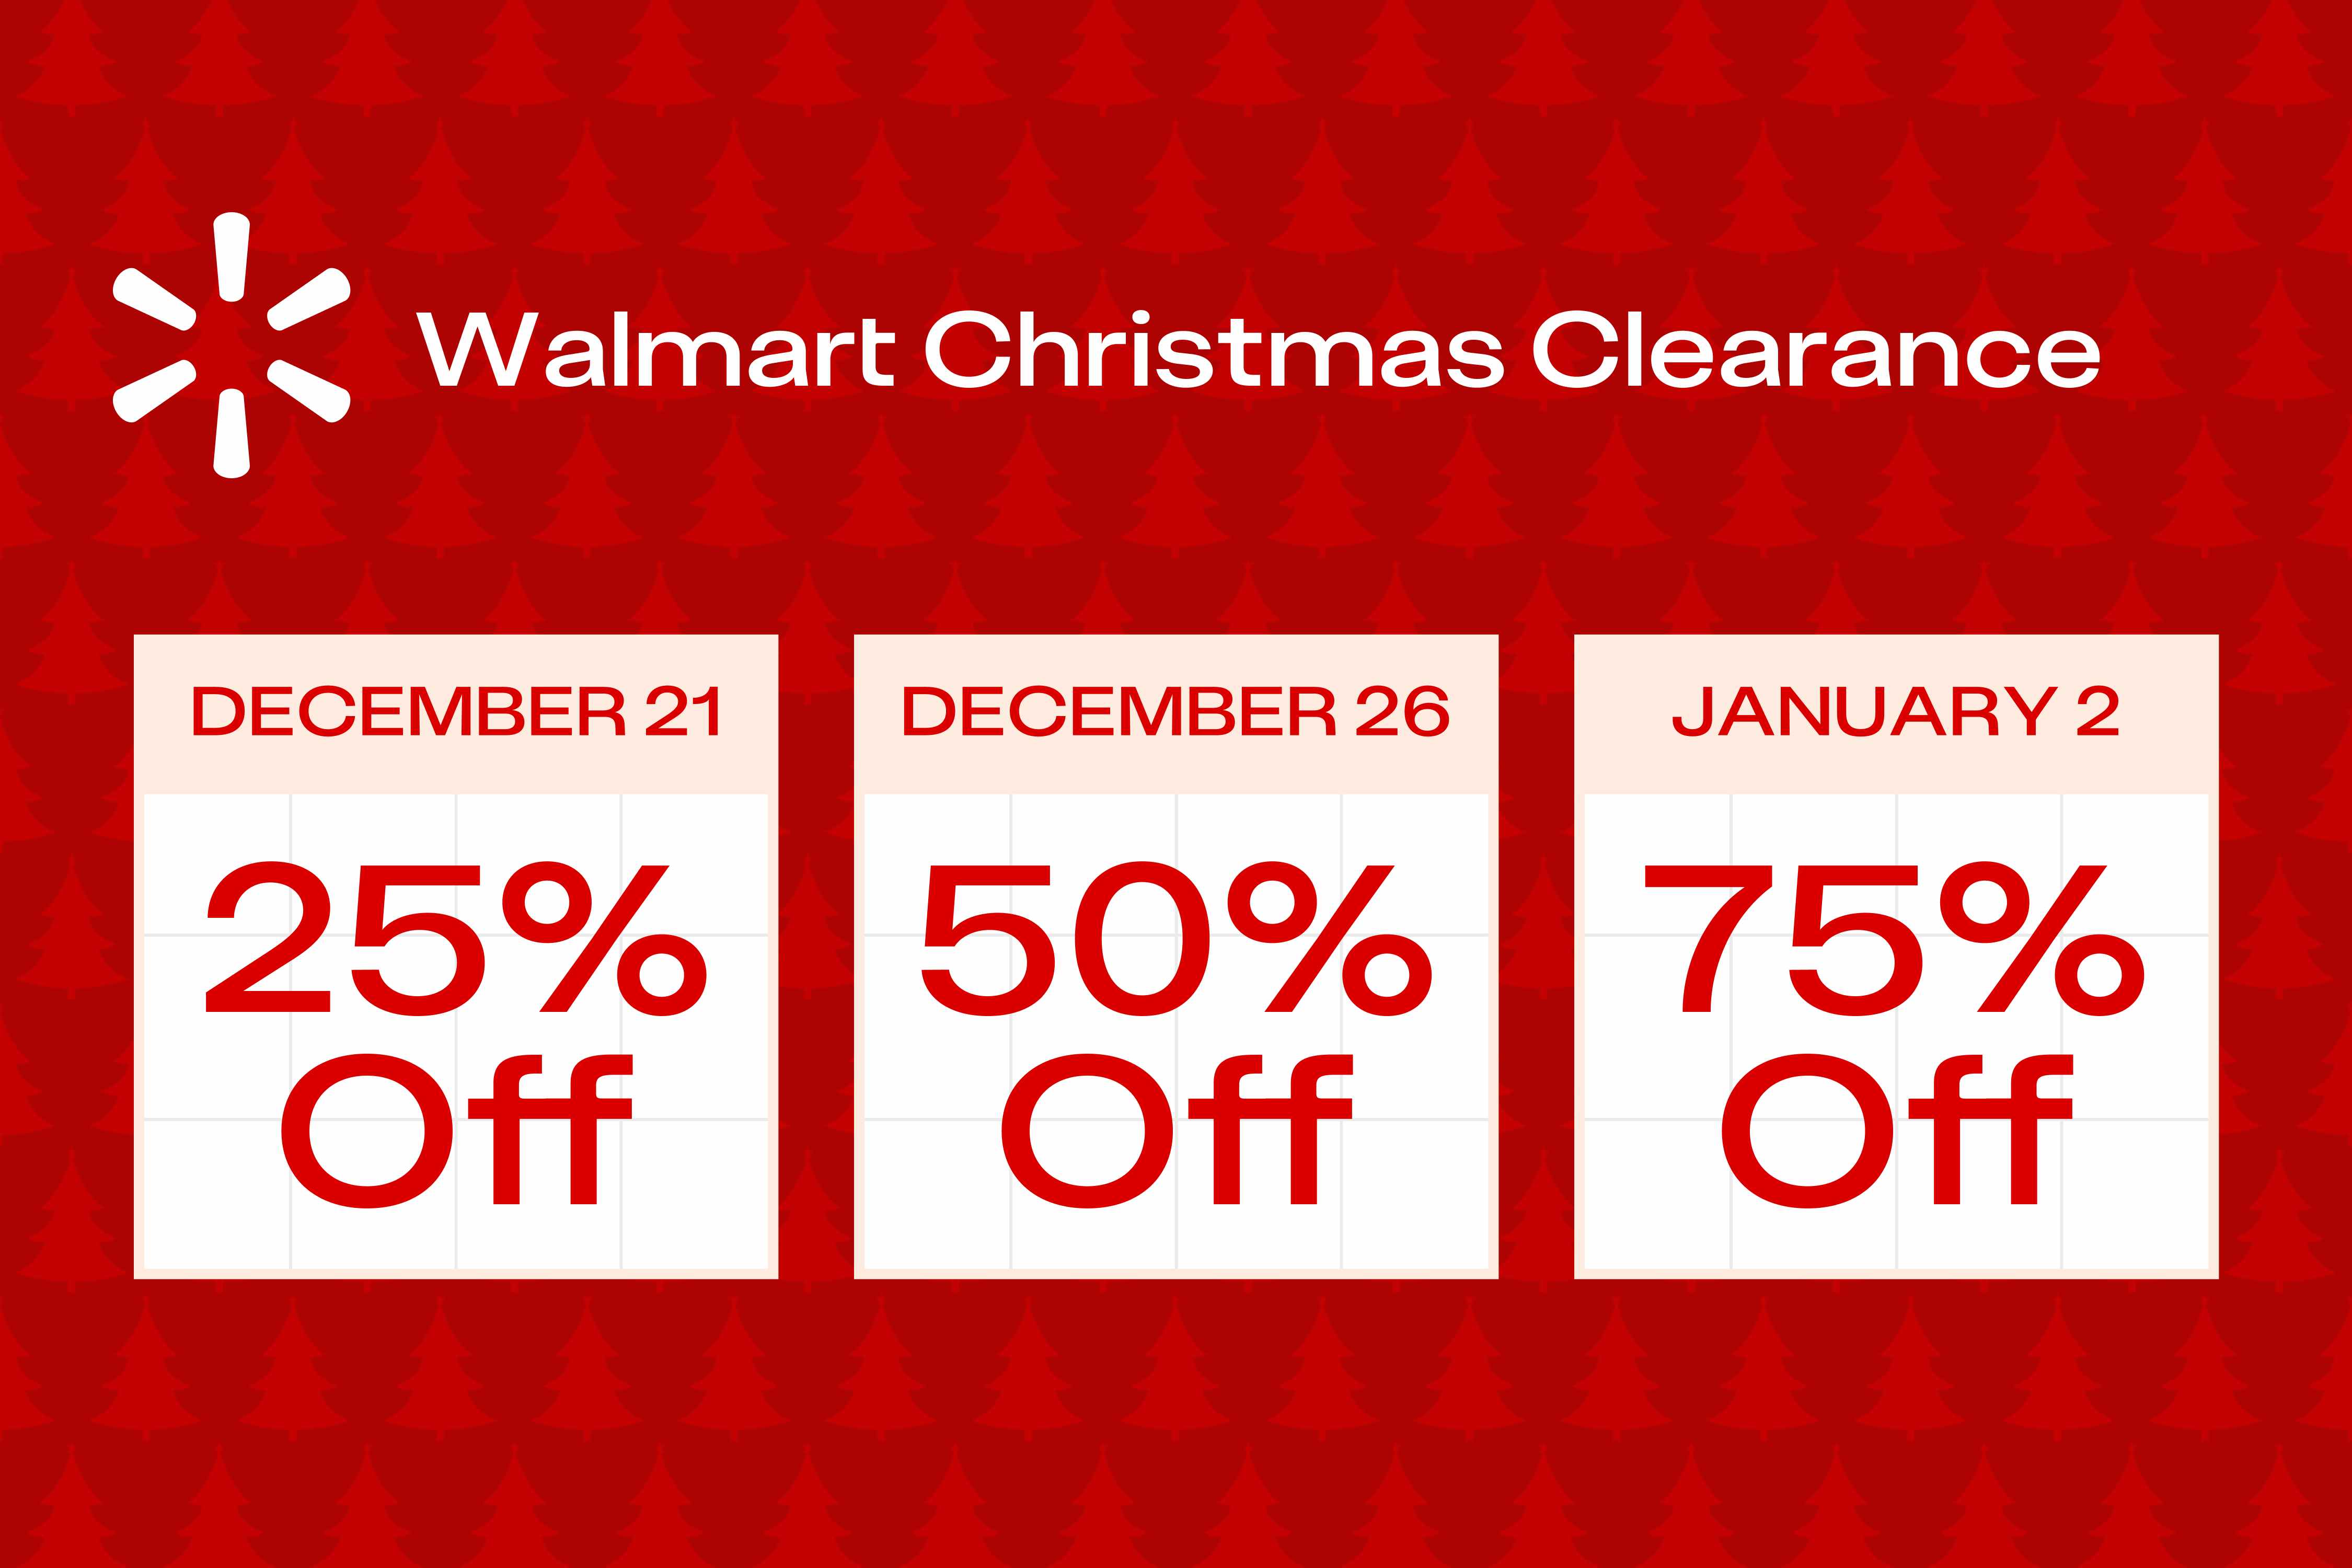 https://prod-cdn-thekrazycouponlady.imgix.net/wp-content/uploads/2023/12/walmart-christmas-clearance-1703014791-1703014791.png?auto=format&fit=fill&q=25